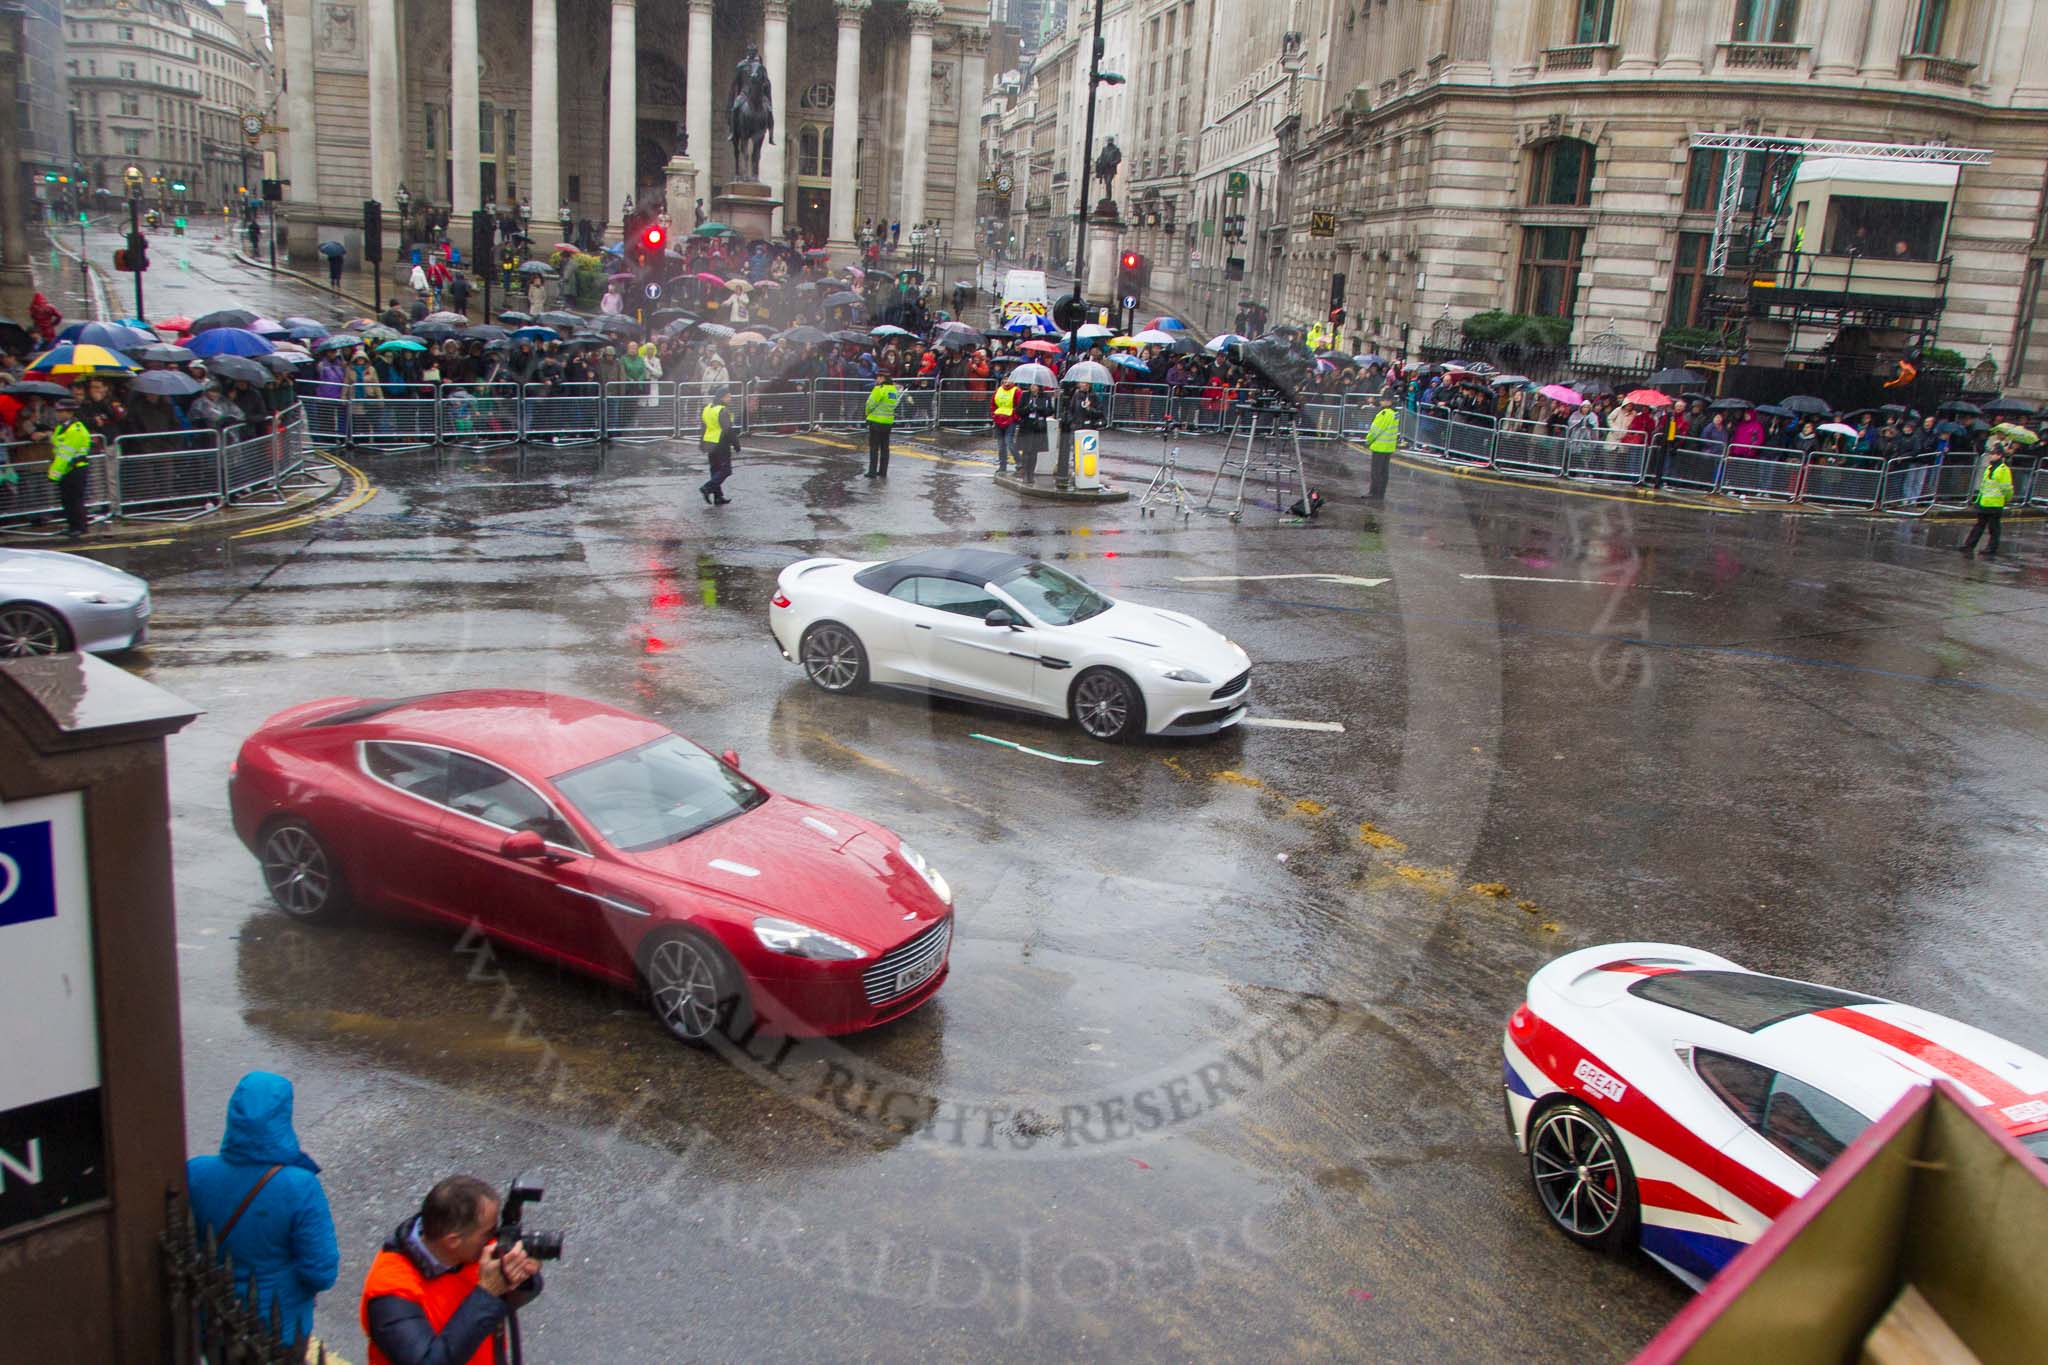 Lord Mayor's Show 2013: 78-Aston Martin Lagonda representing the Coachmakers- reflecting its modern association with the motor industry, the Company of Coachmakers and Coach Harness Makers is collaborating with Aston Martin, which this year celebrate 100 years of 'power, beauty and soul'..
Press stand opposite Mansion House, City of London,
London,
Greater London,
United Kingdom,
on 09 November 2013 at 11:43, image #944